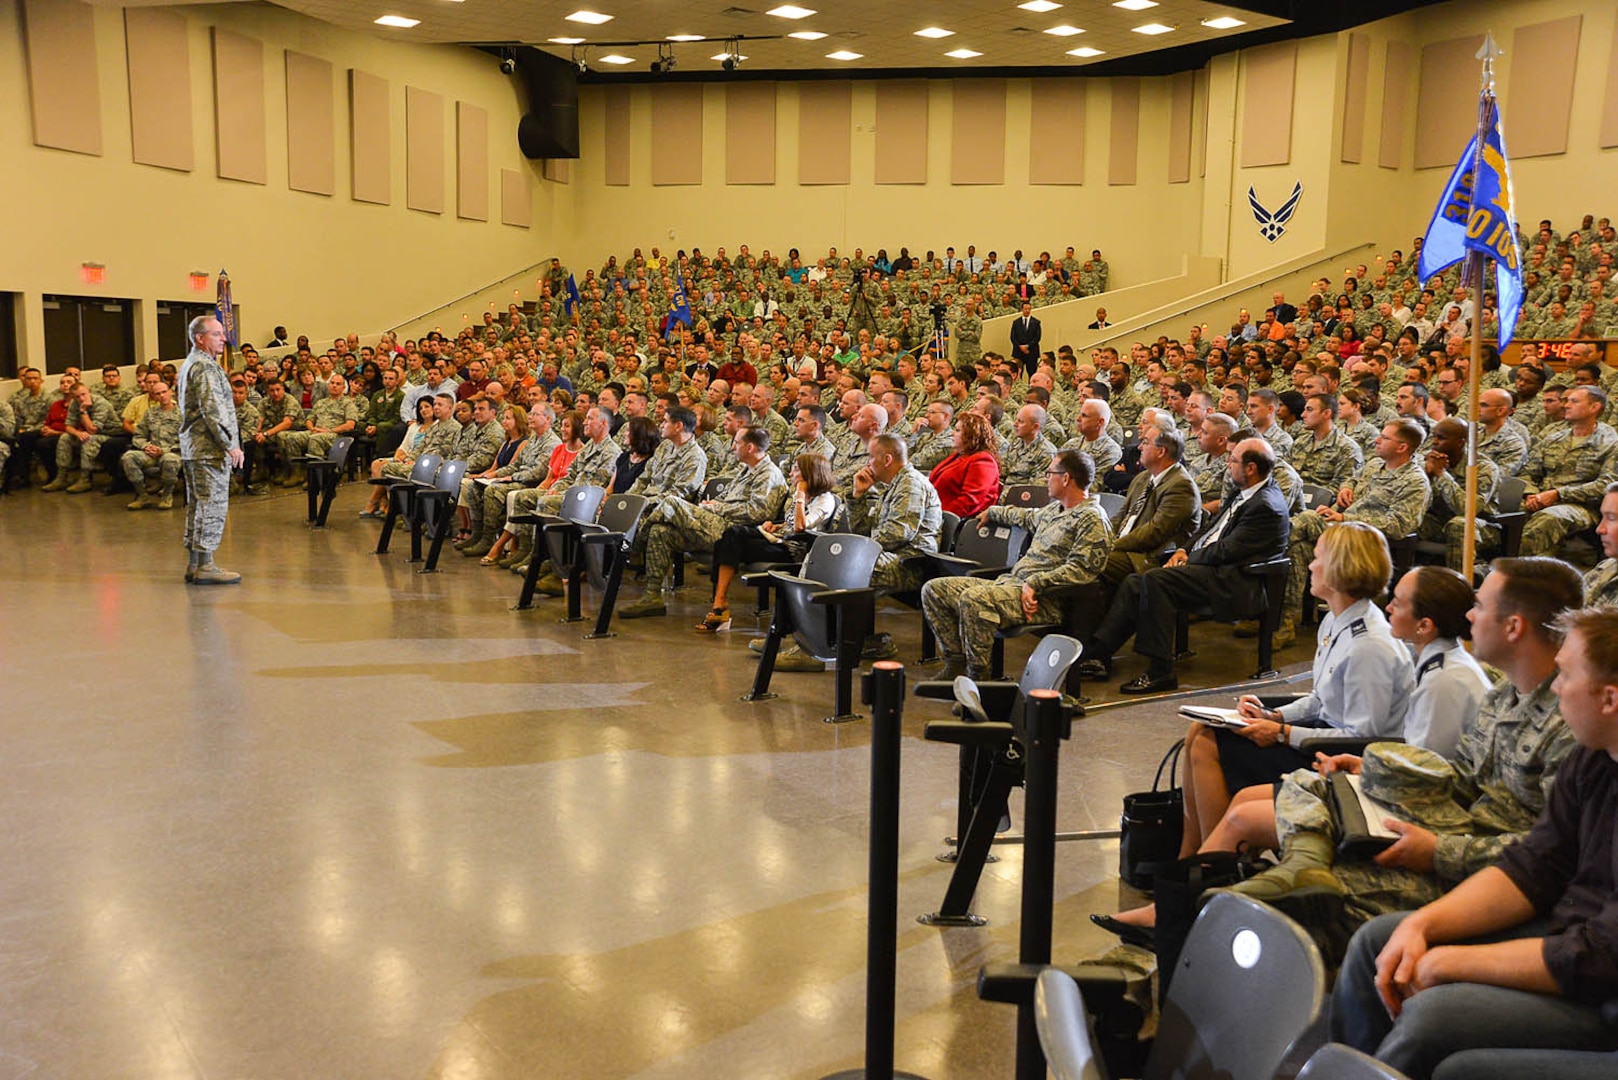 General Mark A. Welsh III, United States Air Force Chief of Staff, addresses members of the 24th and 25th Air Forces at the Pfingston Basic Military Training Center, and praises their work in the cyber and intelligence, surveillance and reconnaissance domains. (U.S. Air Force photo by William B. Belcher/Released)